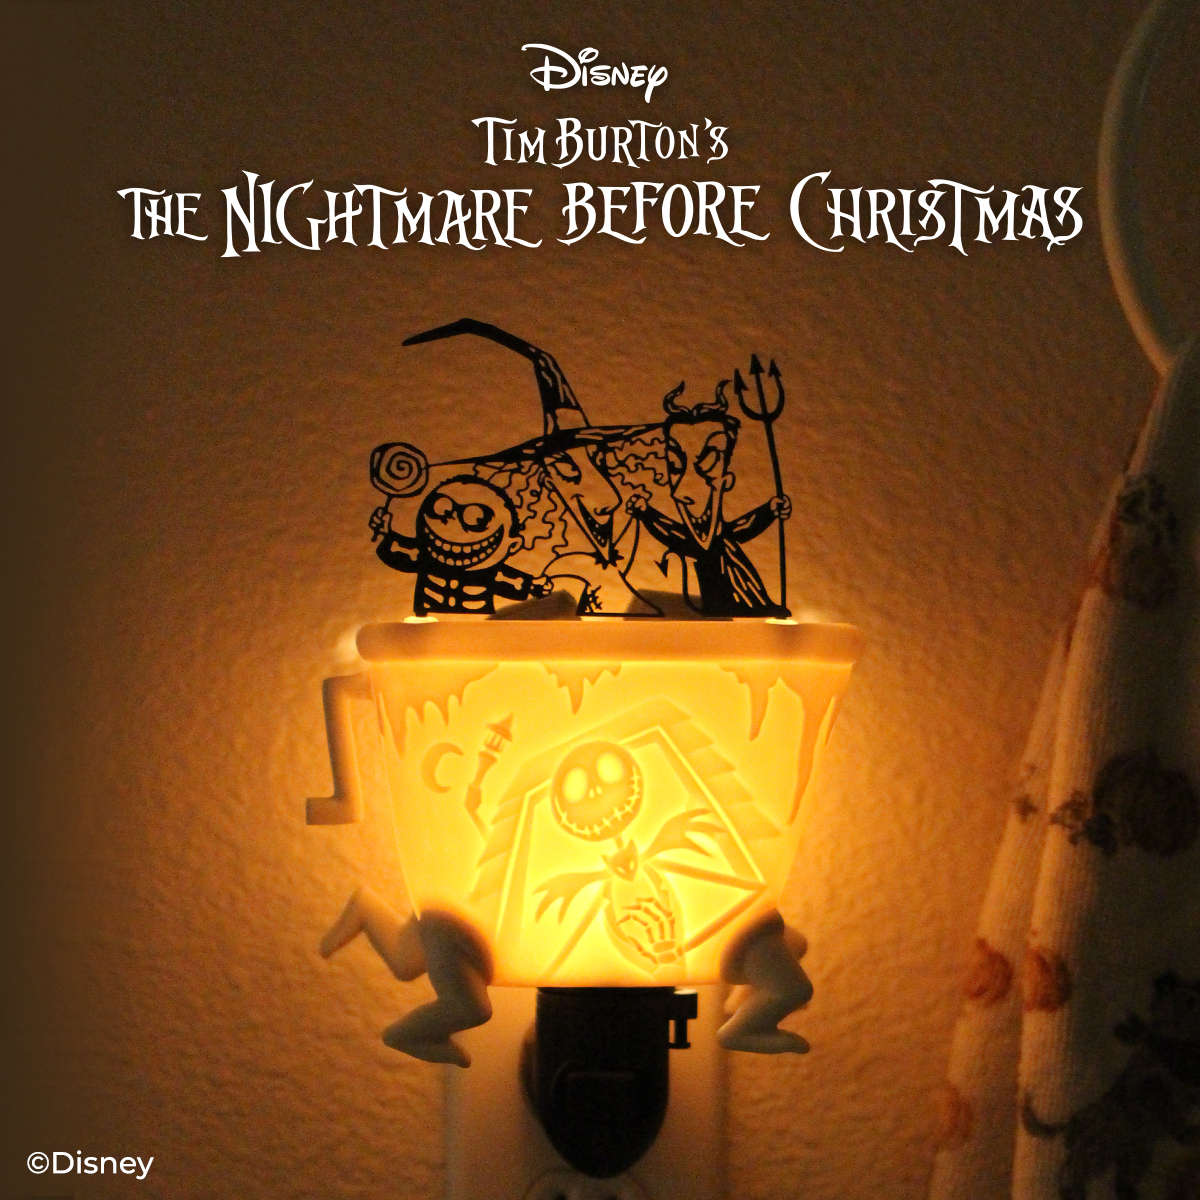 A Nightmare Before Christmas Scentsy Collection - The Safest Candles